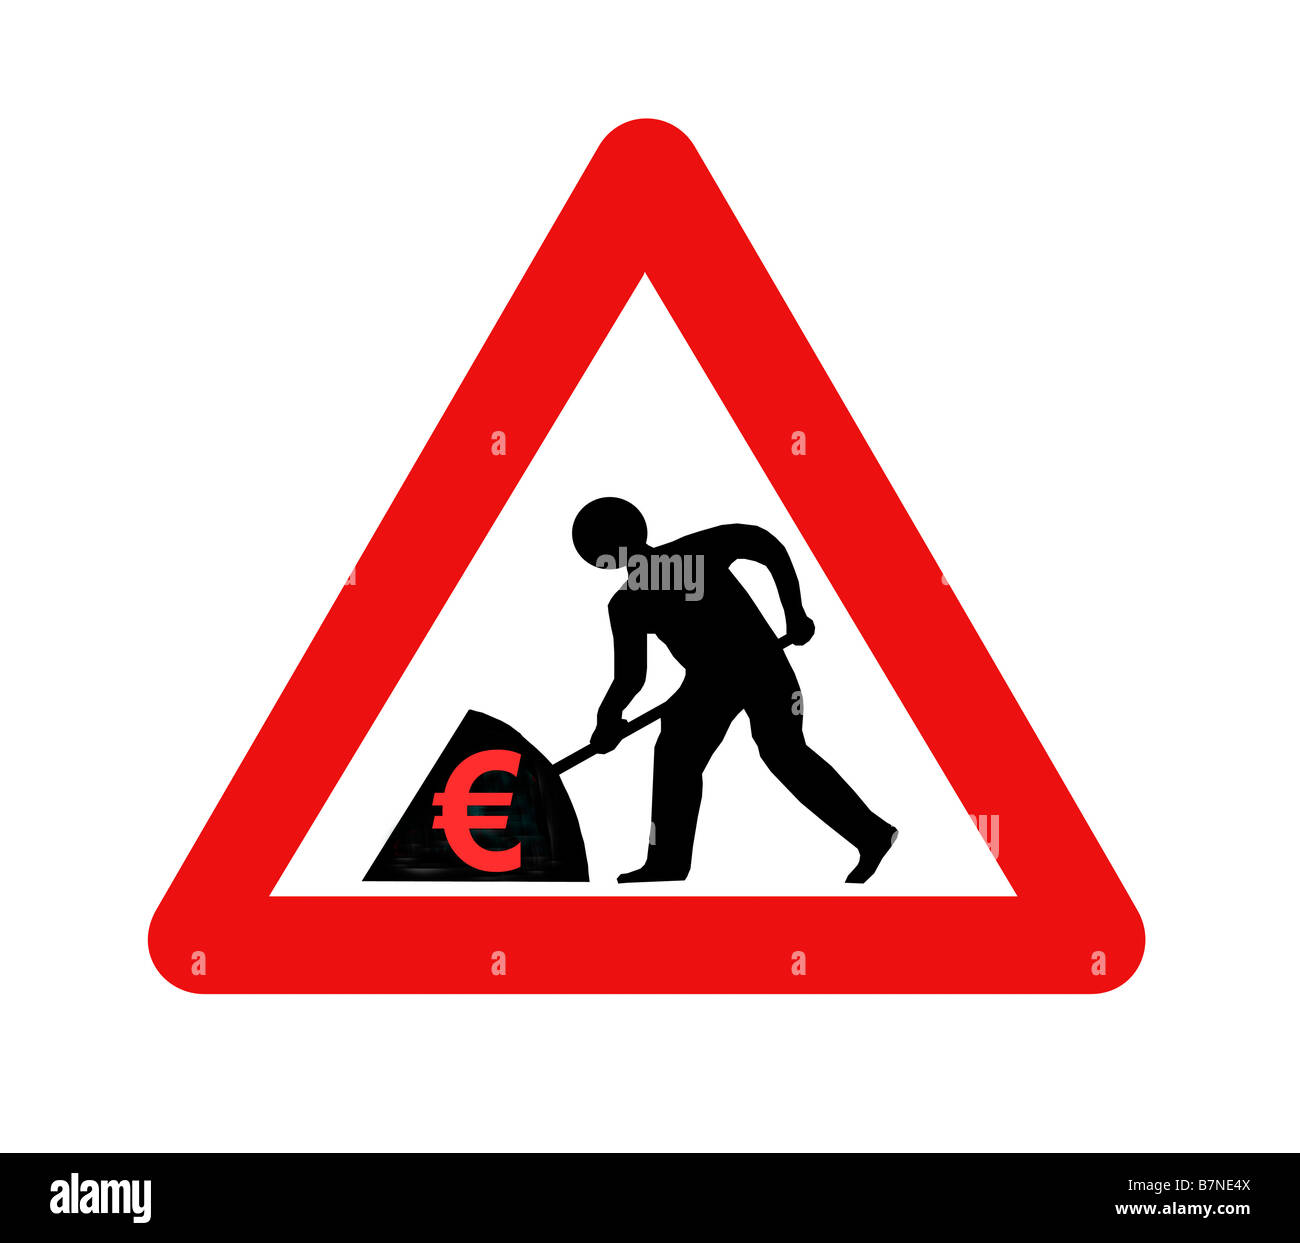 Men at work sign with Euro currency symbol. Stock Photo